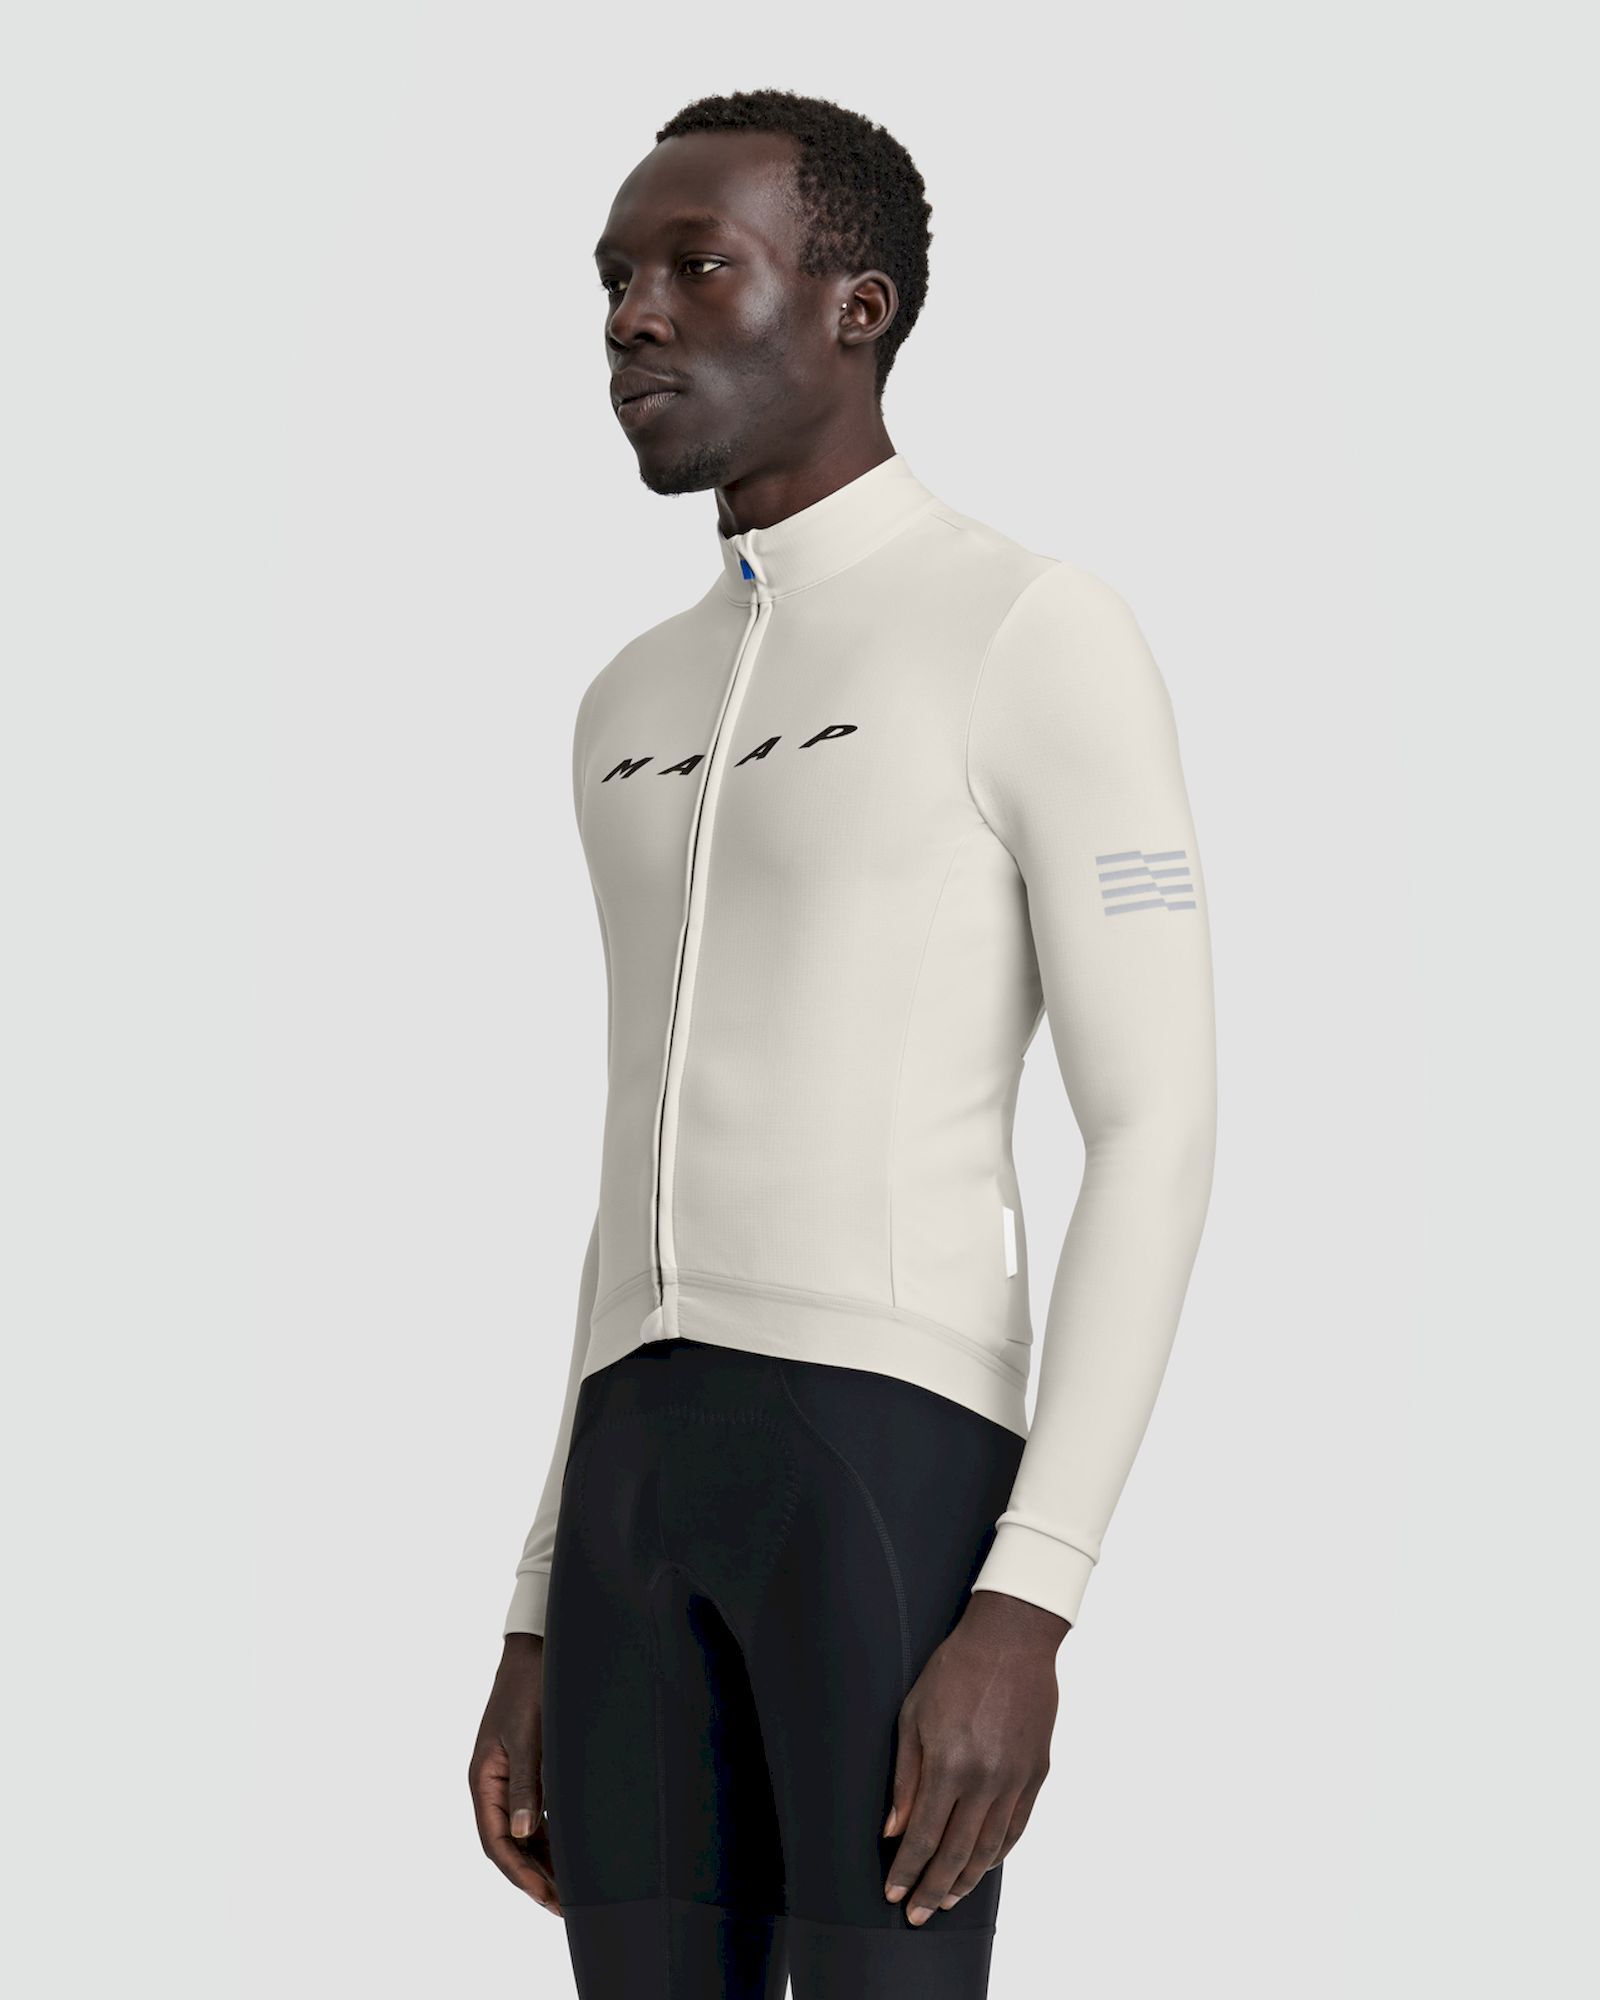 Maap Evade Thermal LS Jersey - Maillot ciclismo - Hombre | Hardloop